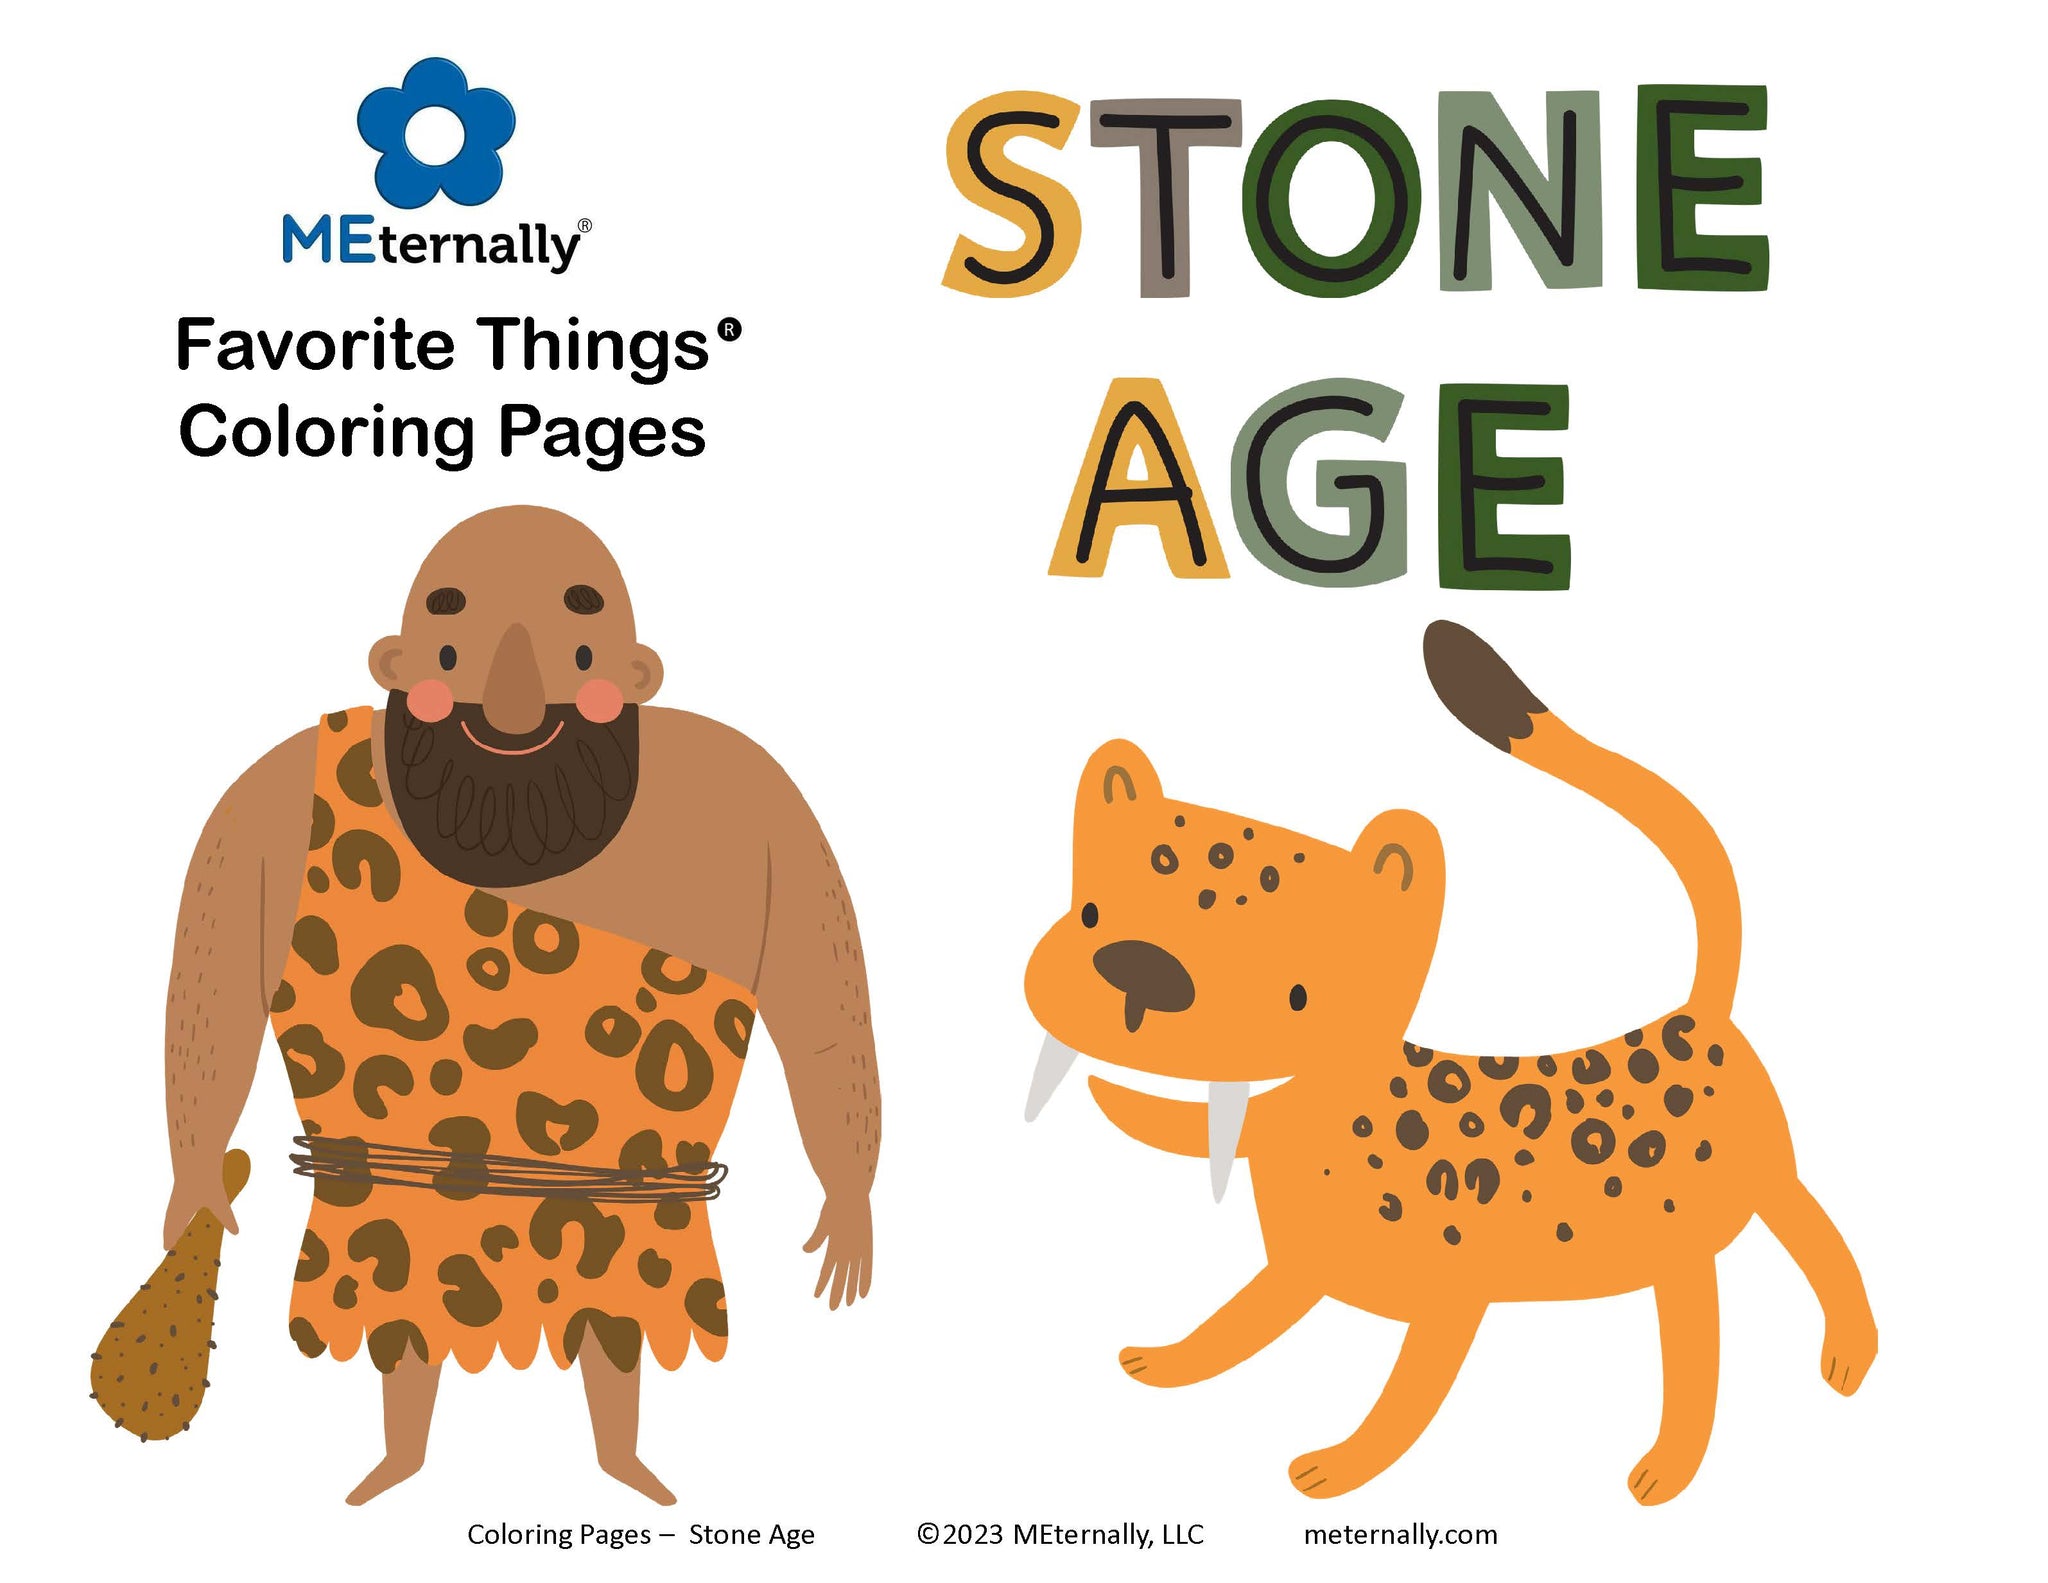 Coloring Pages - Stone Age